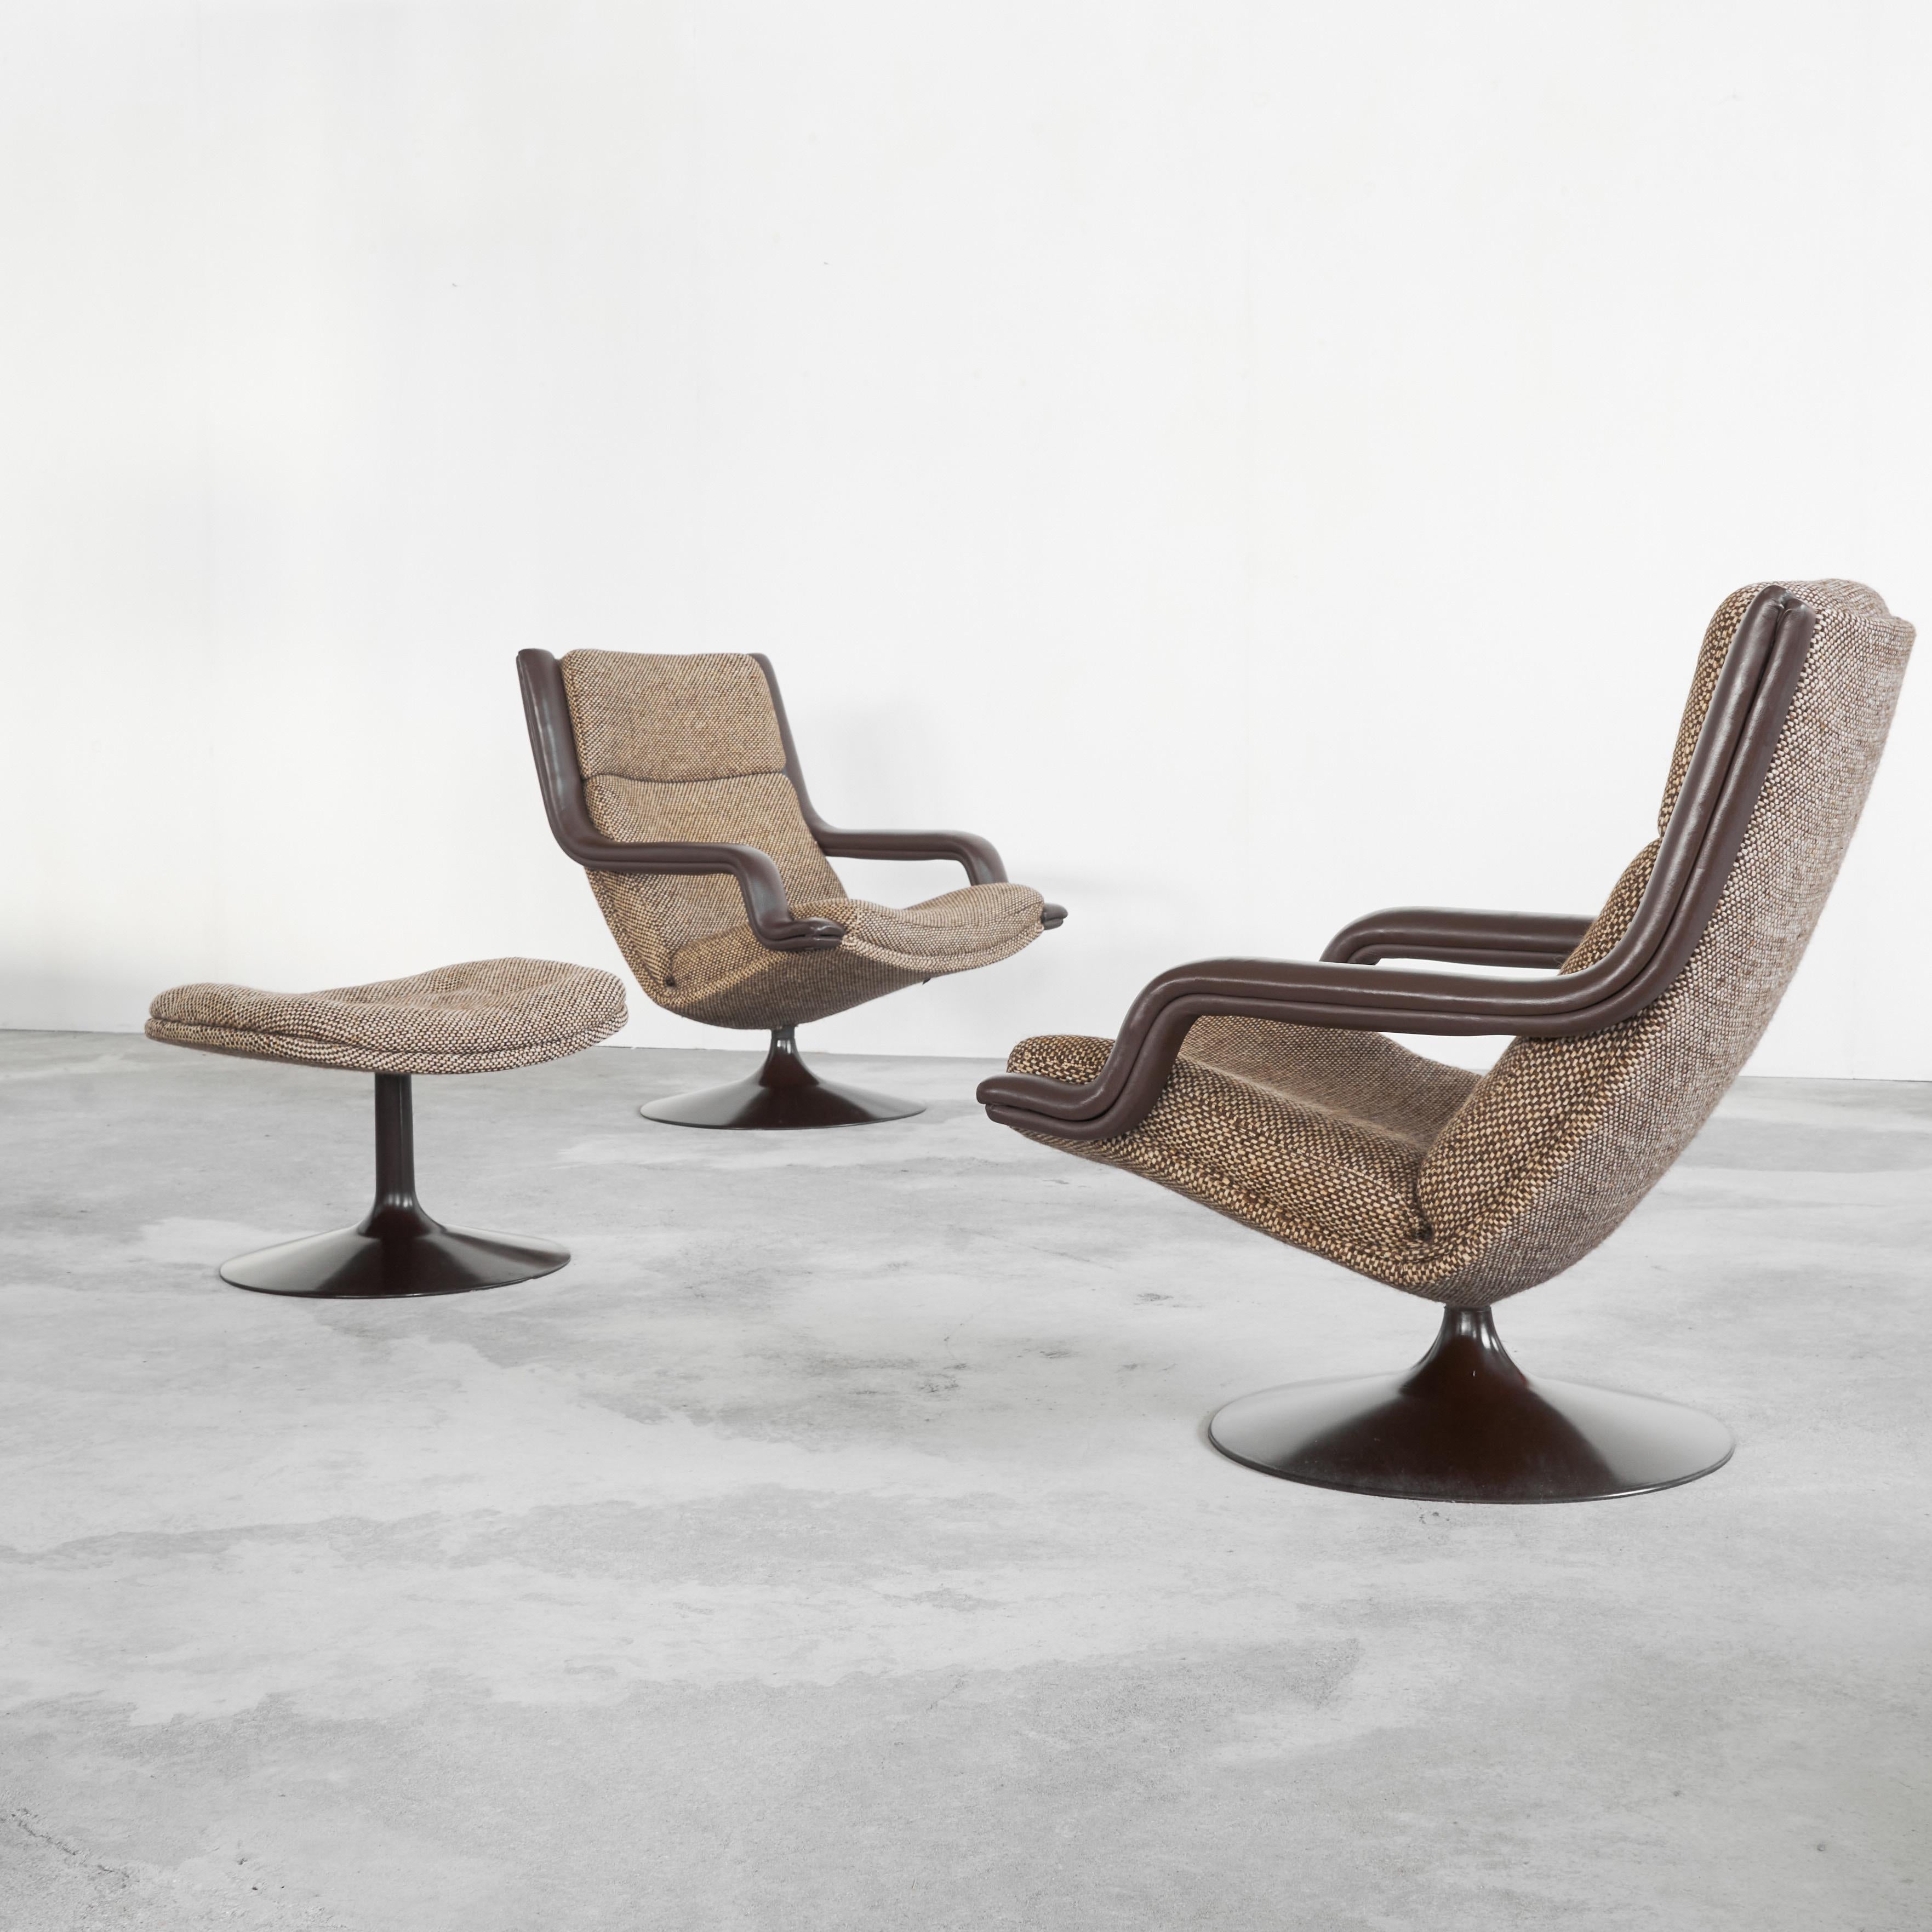 Geoffrey Harcourt Pair of F152 Lounge Chairs with Ottoman for Artifort, The Netherlands, 1975.

Beautiful and original pair of swivel lounge chairs designed by Geoffrey Harcourt (1936-) for Dutch high-end manufacturer Artifort from Maastricht. They